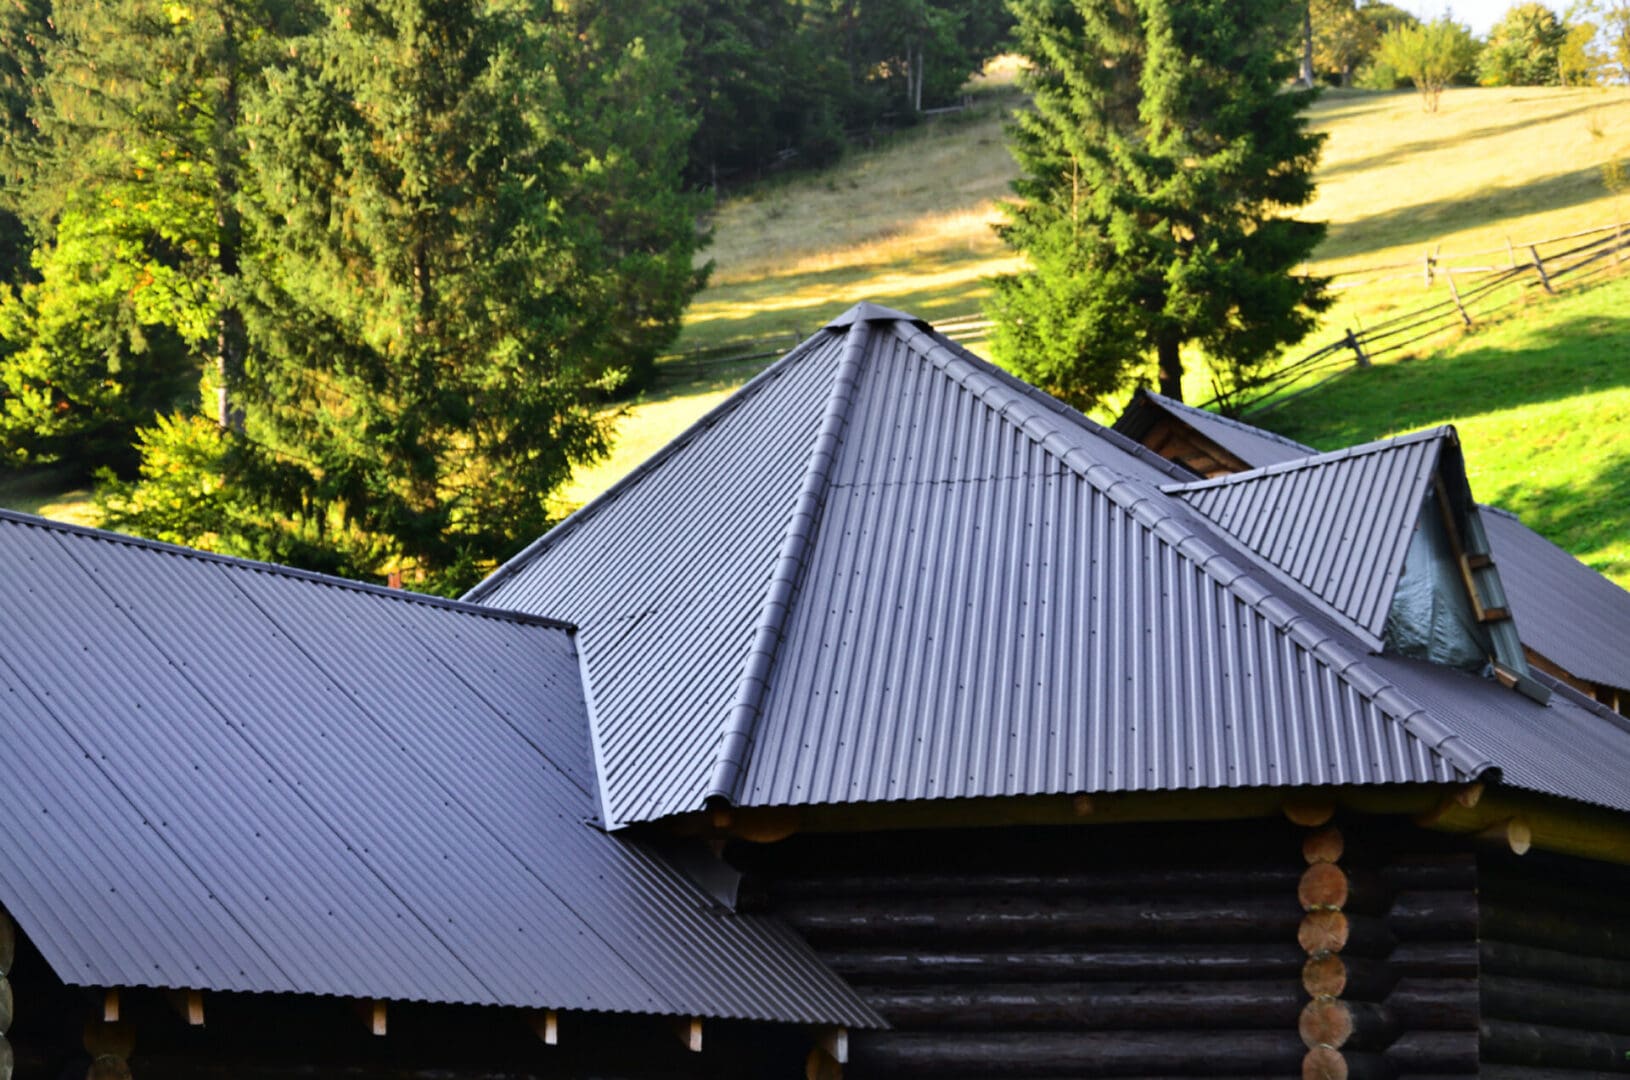 A house with a metal roof and trees in the background.